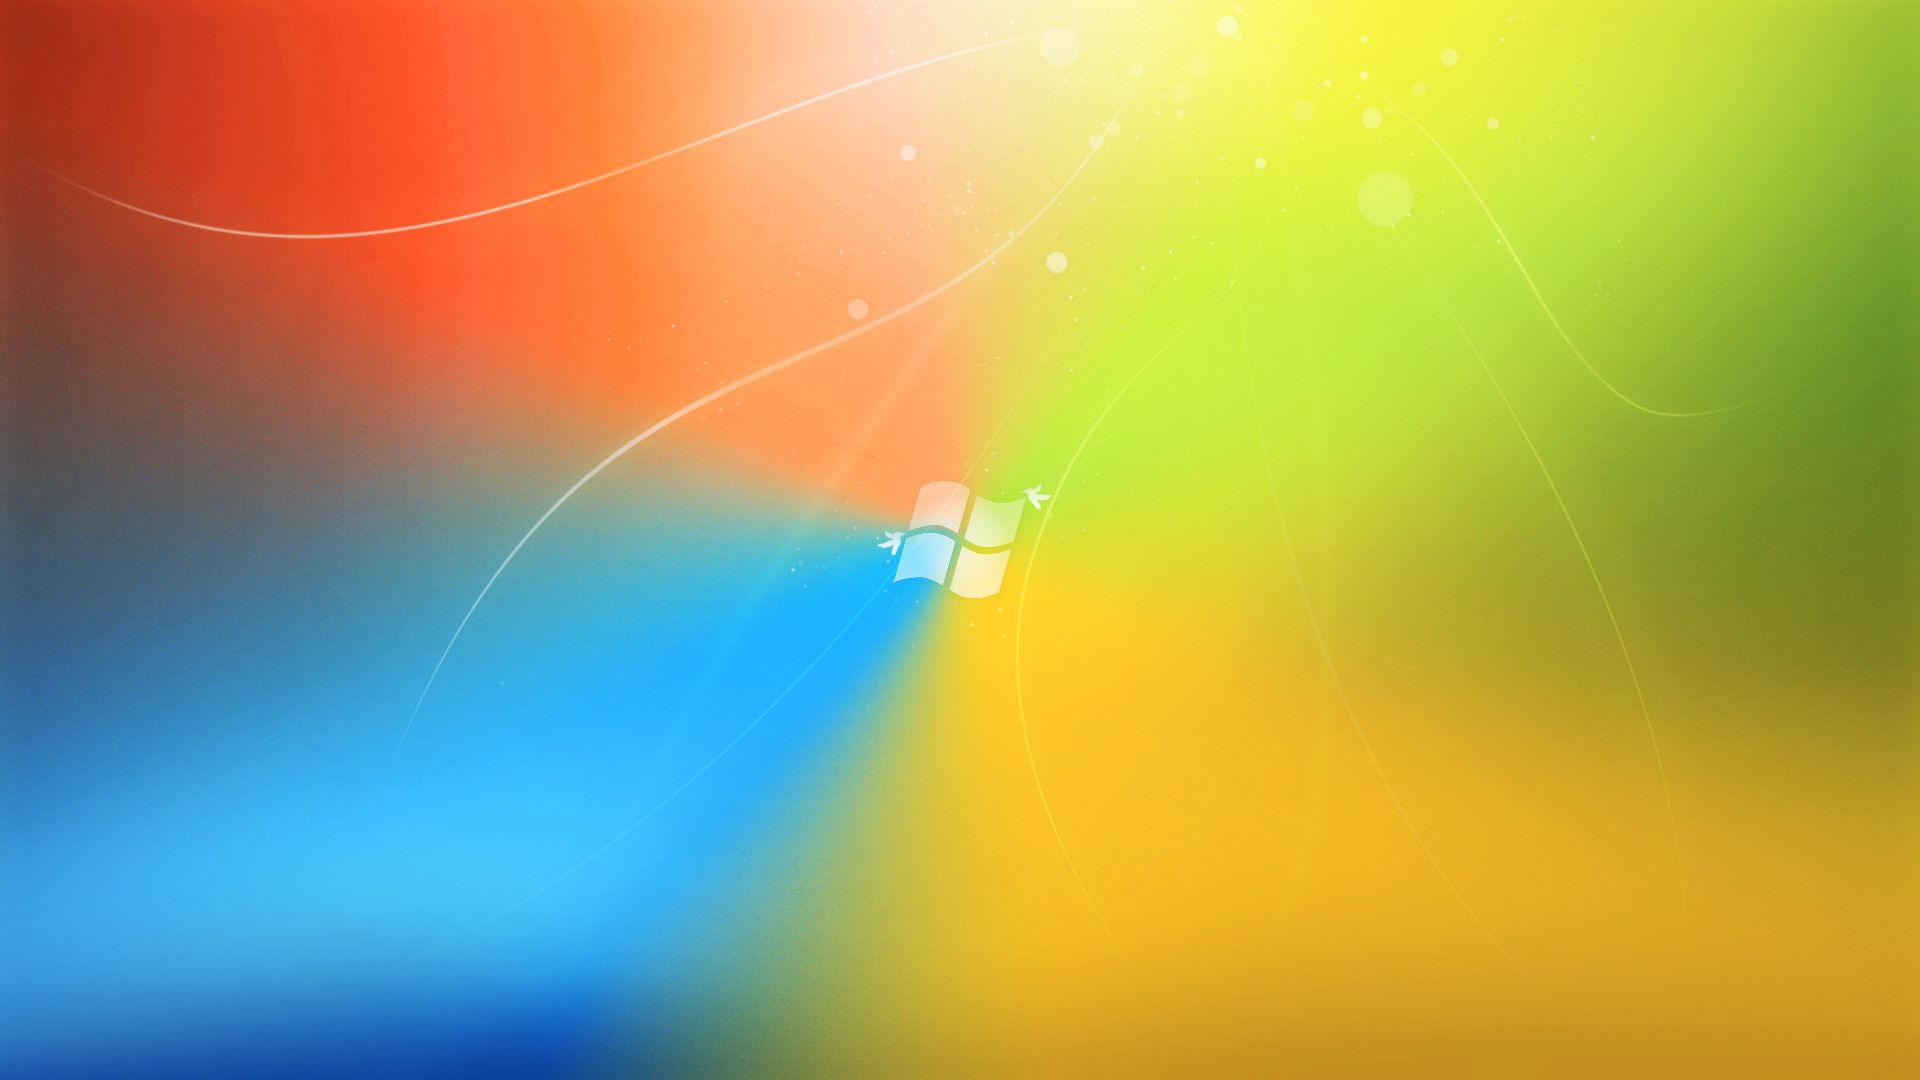 Colorful Windows 7 HD Wallpapers HD Backgrounds